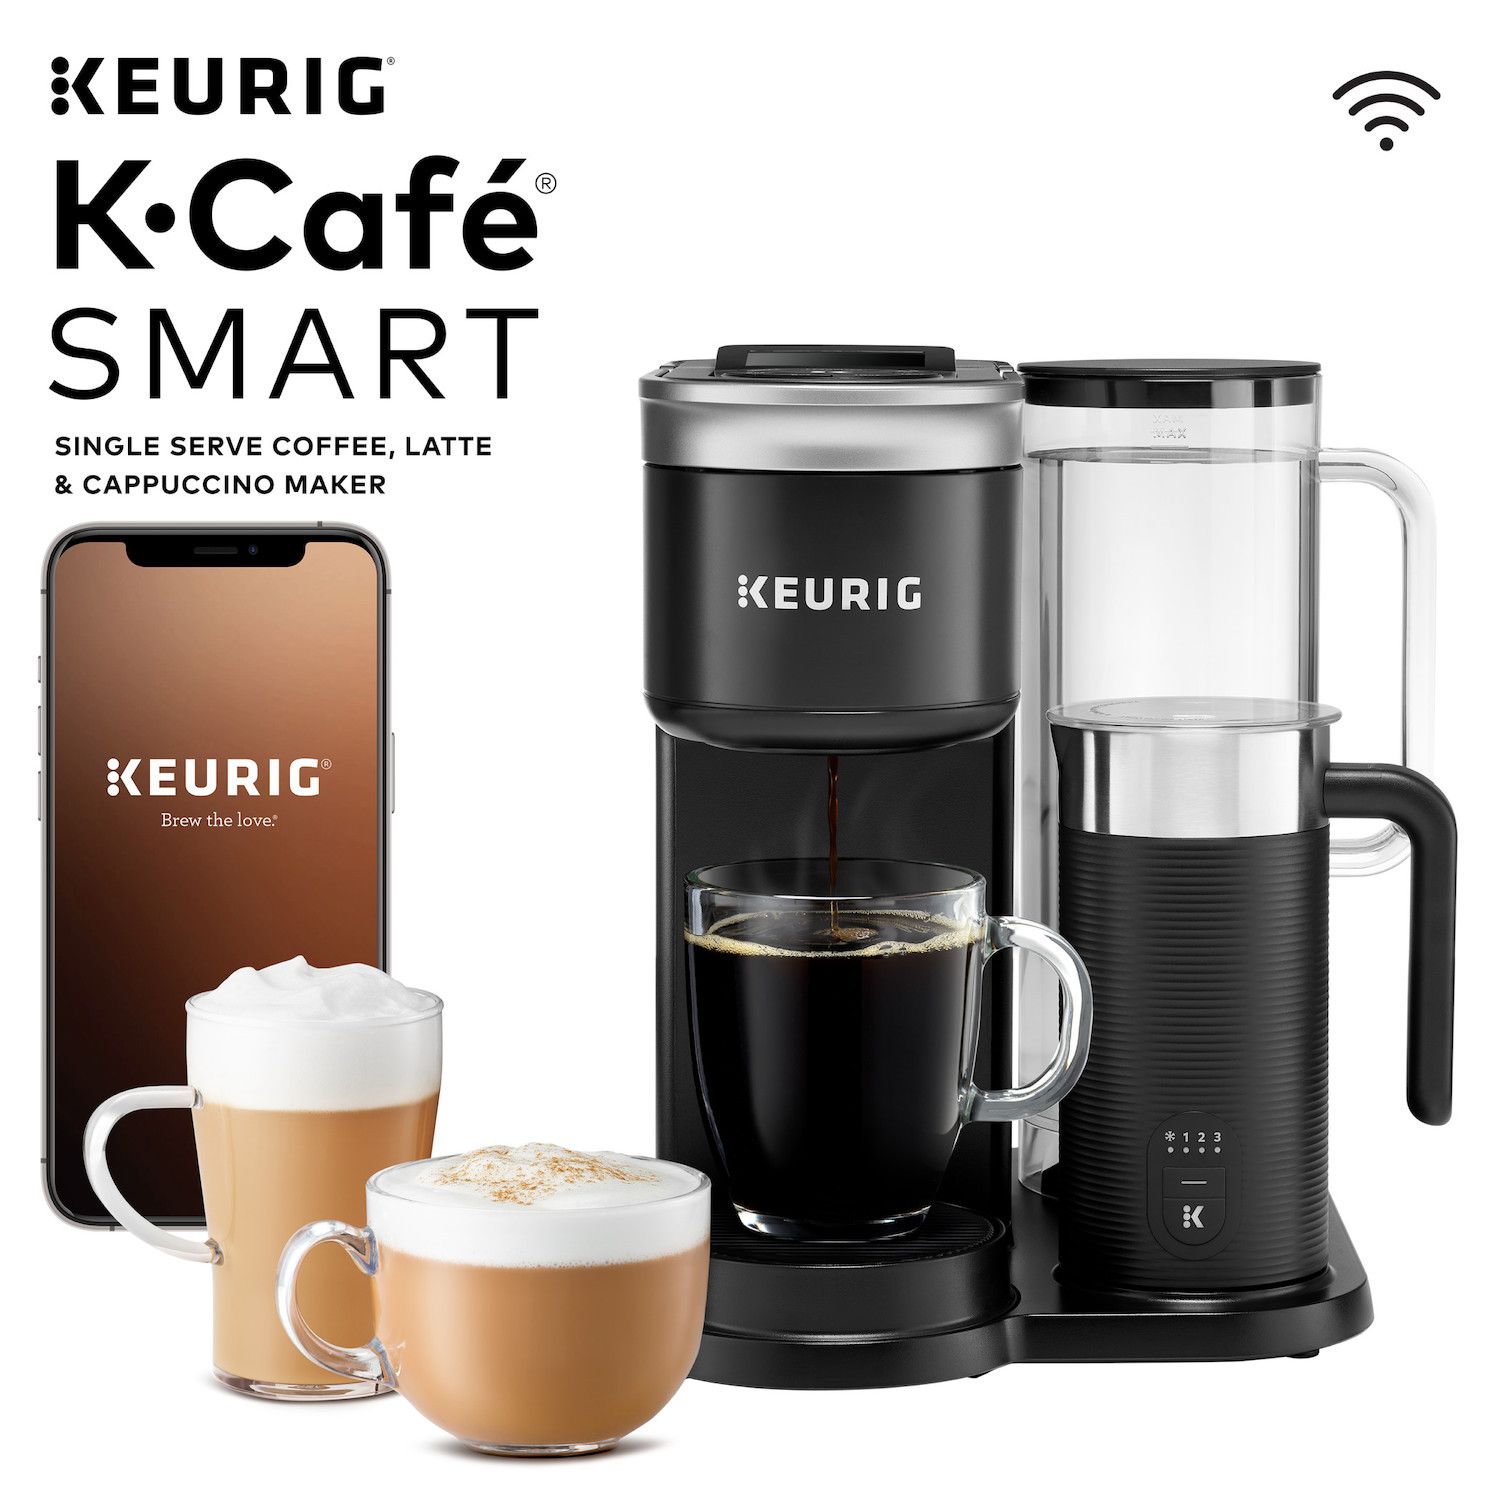 Keurig's K15 Single Serve Compact K-Cup Coffee Maker is down to $50 shipped  today (Reg. $70+)